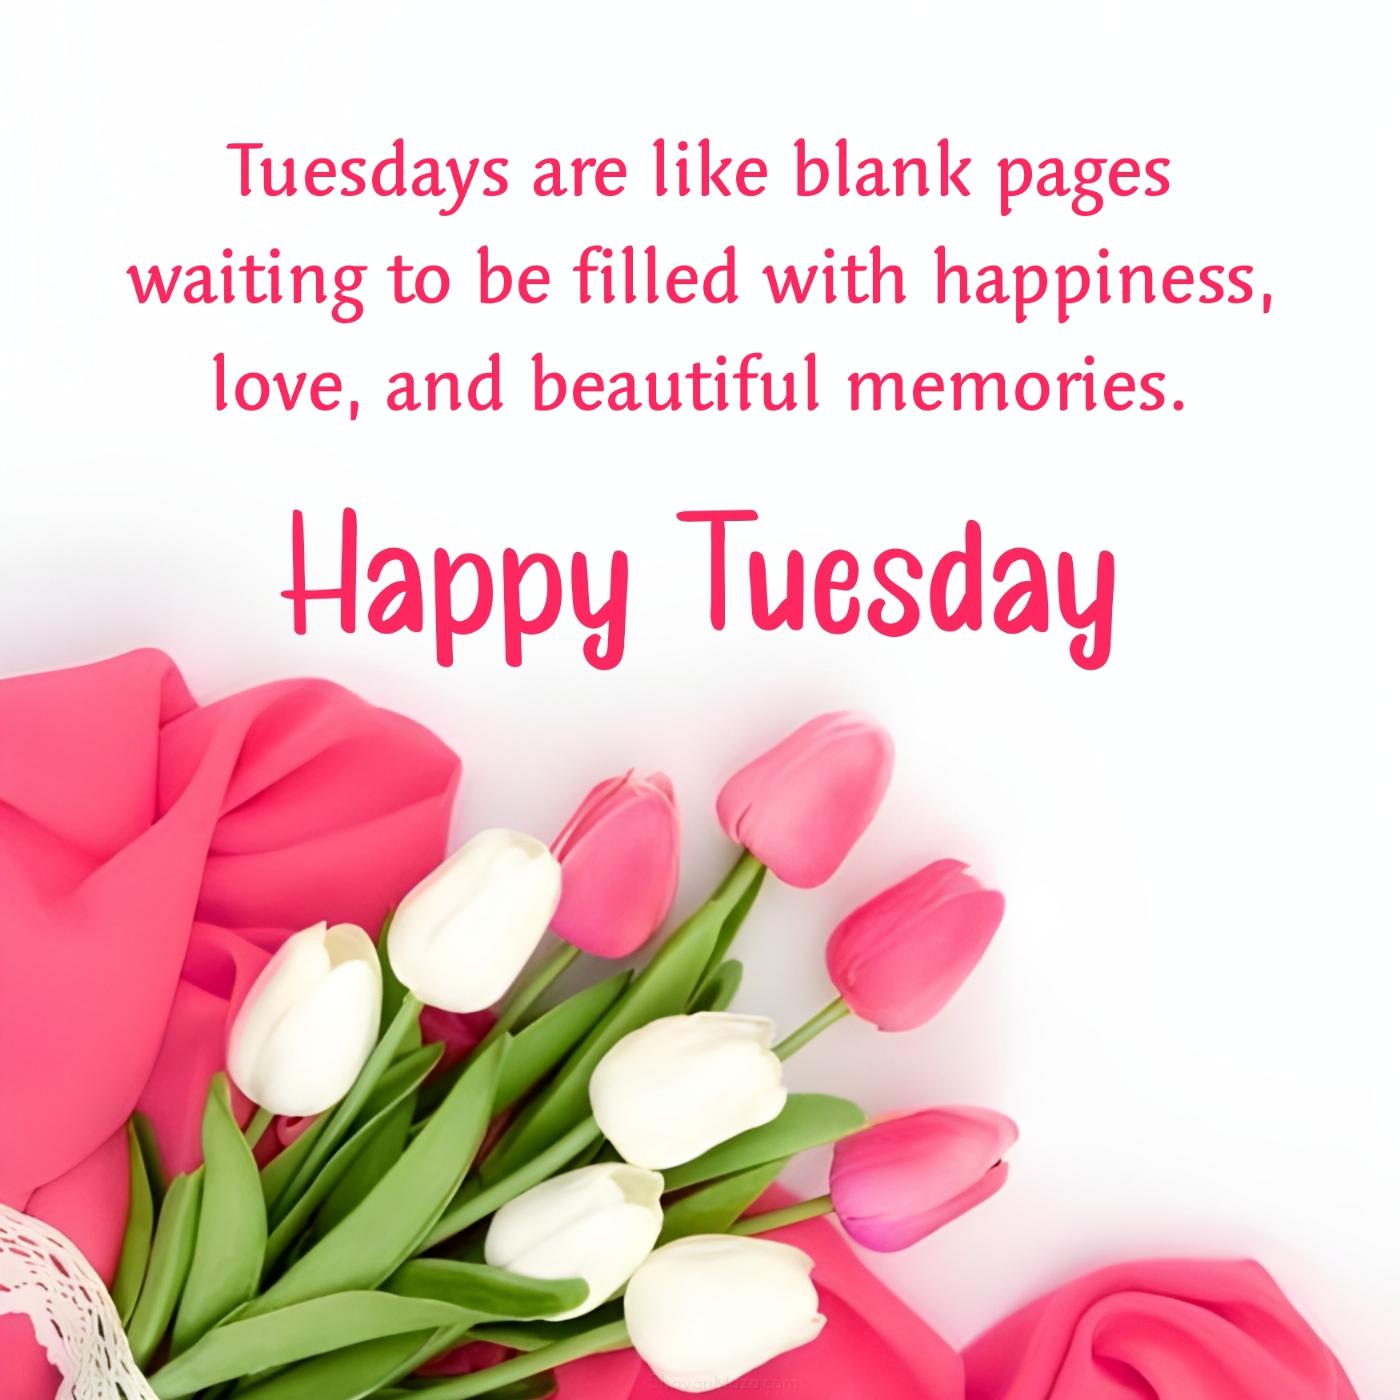 Tuesdays are like blank pages waiting to be filled with happiness